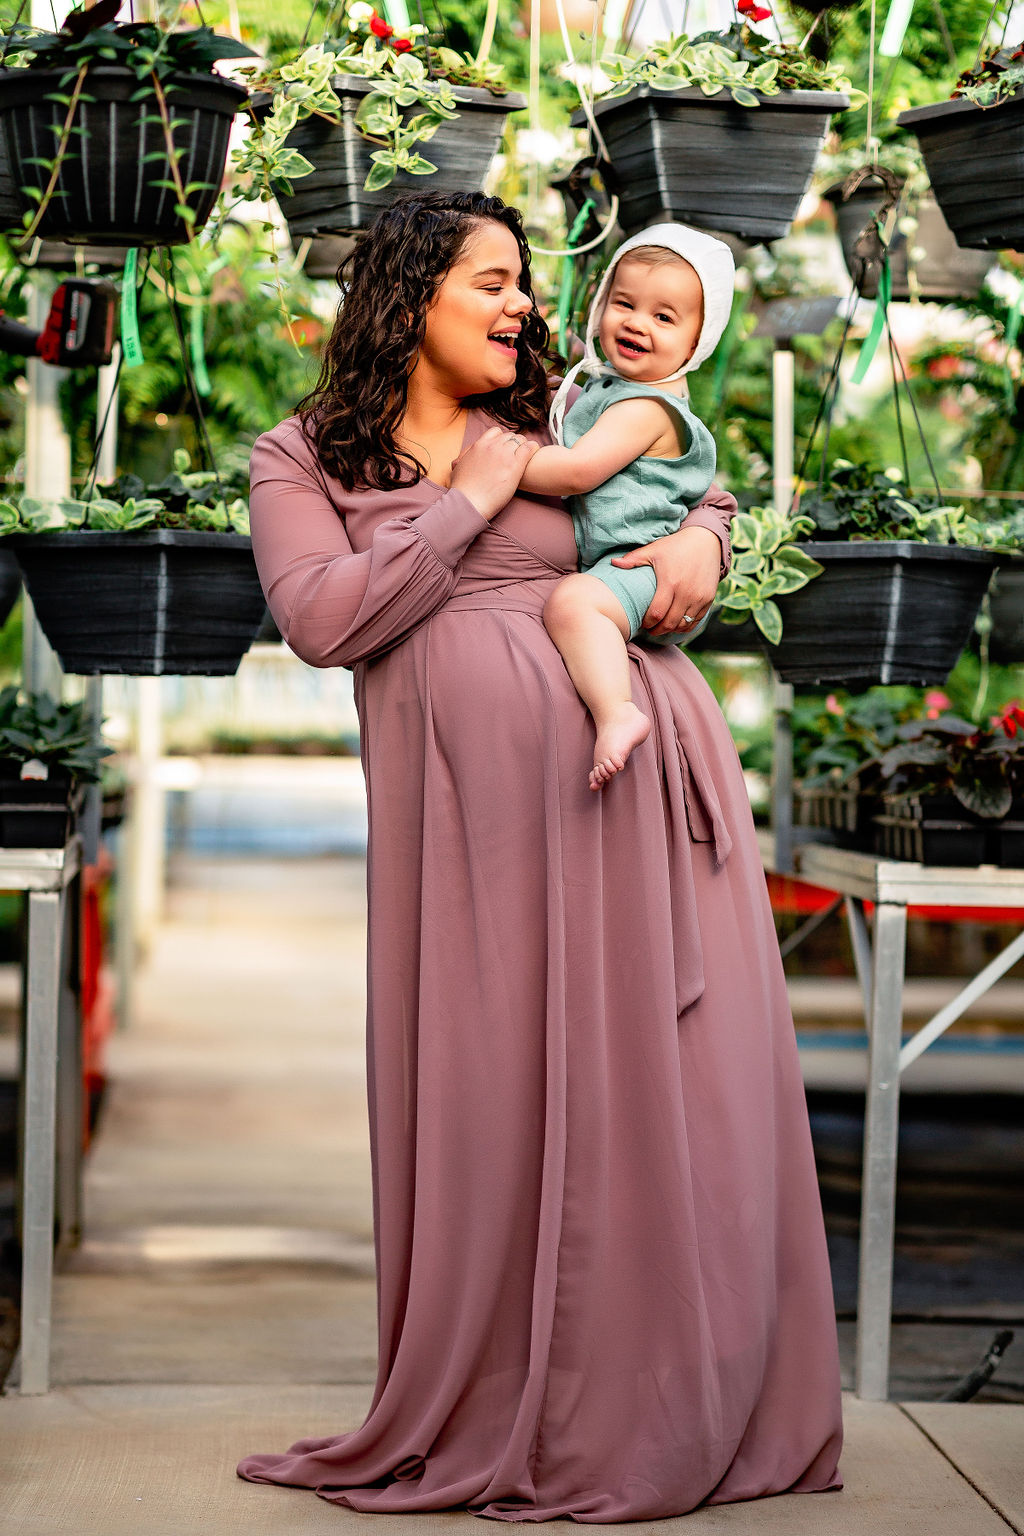 A pregnant woman stands in a greenhouse surrounded by hanging plants in a maroon maternity gown while holding her toddler on her hip marshall midwifery